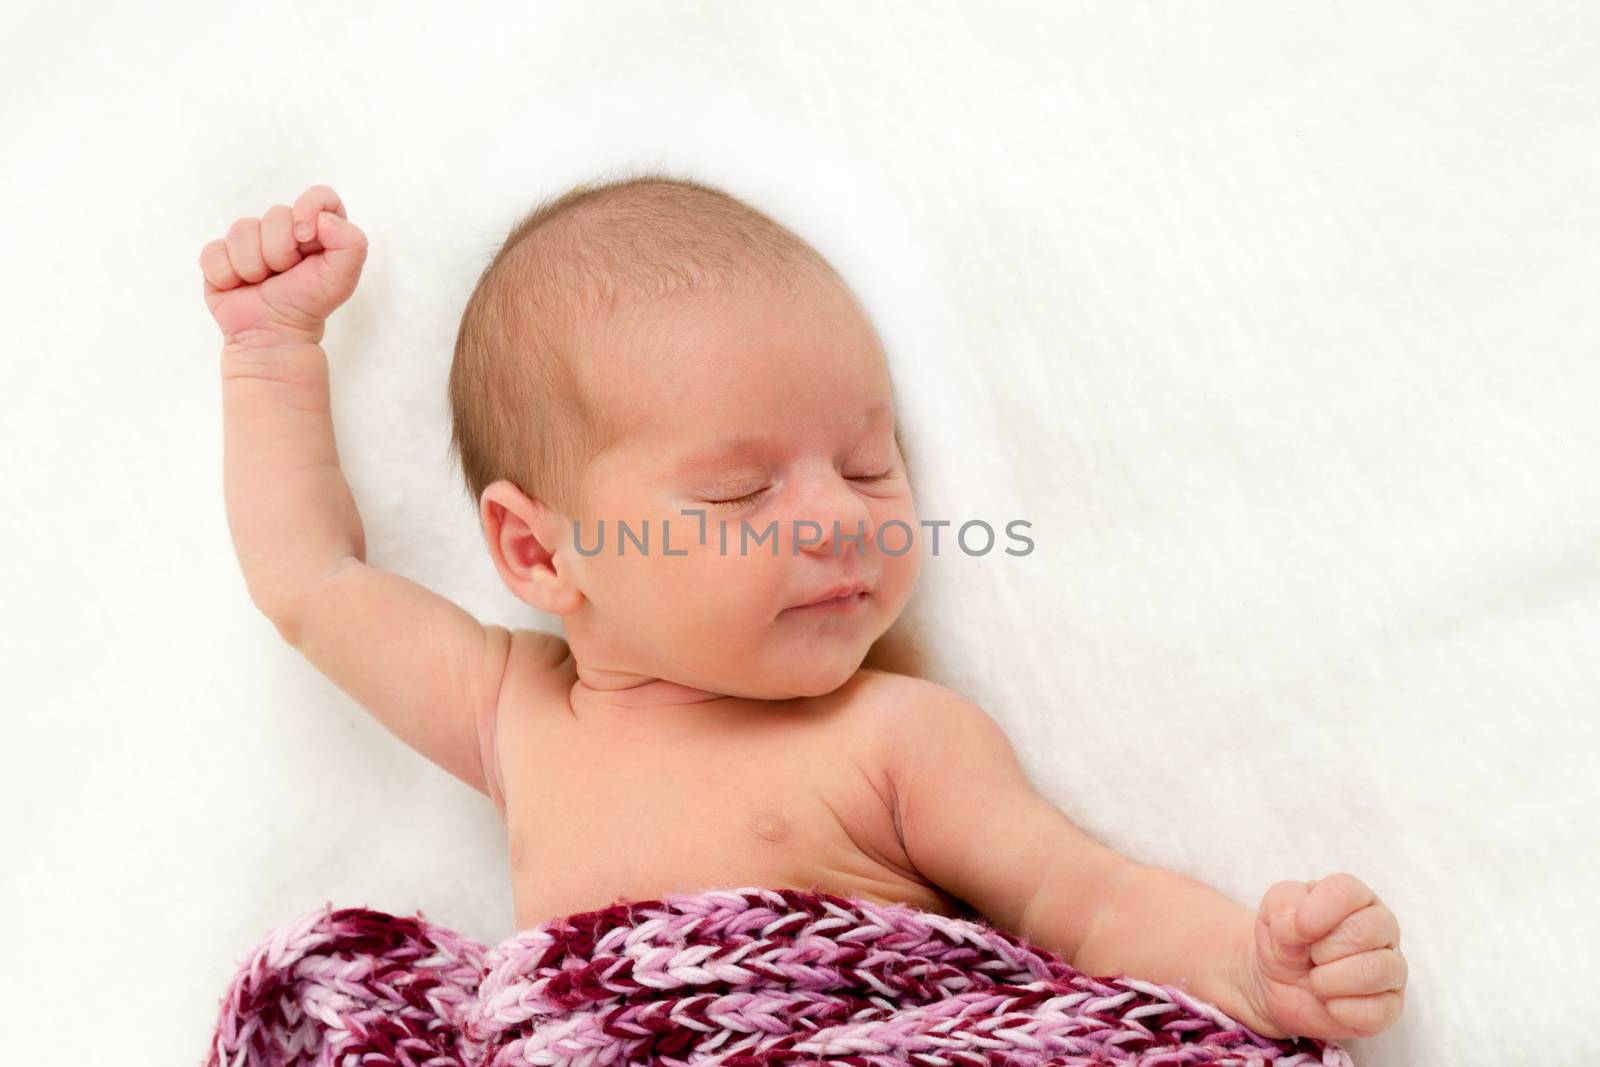 sleeping newborn baby in shawl on white blanket - the first week of the new life